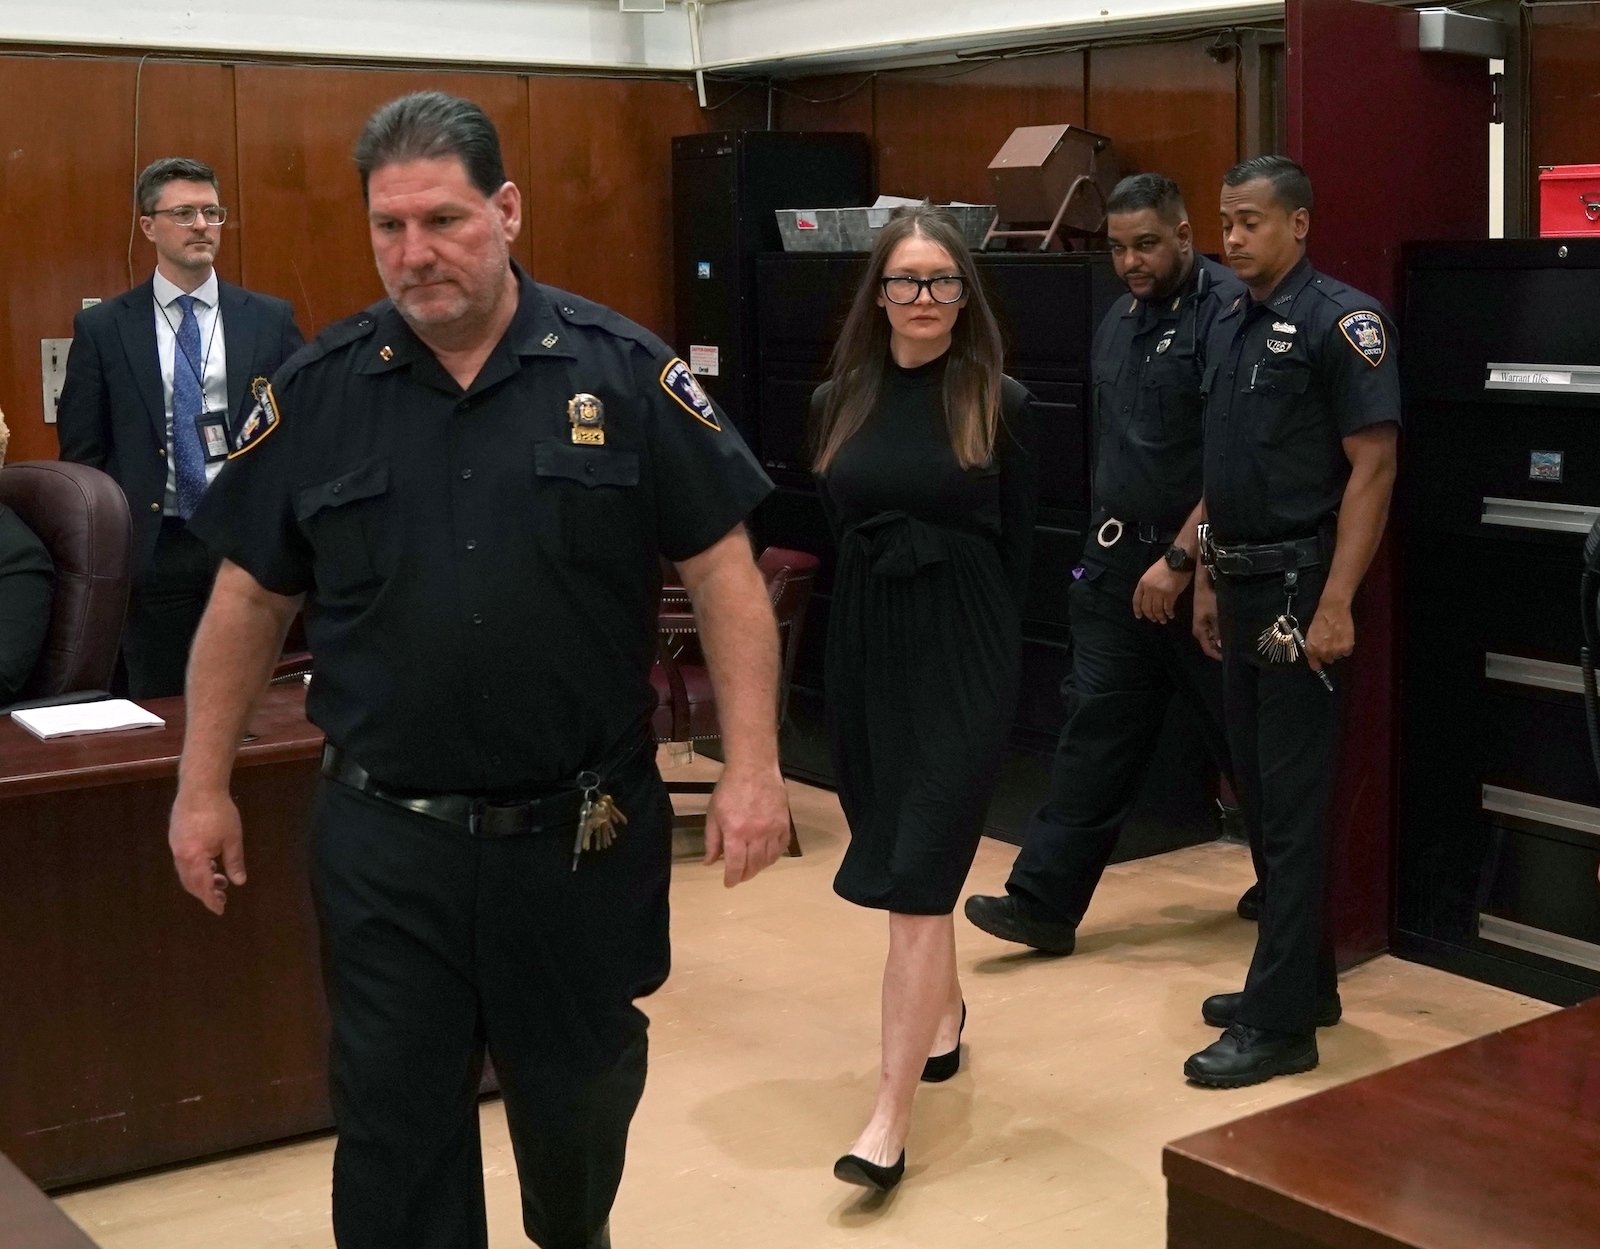 Anny Delvey arrived in court while handcuffed in 2019